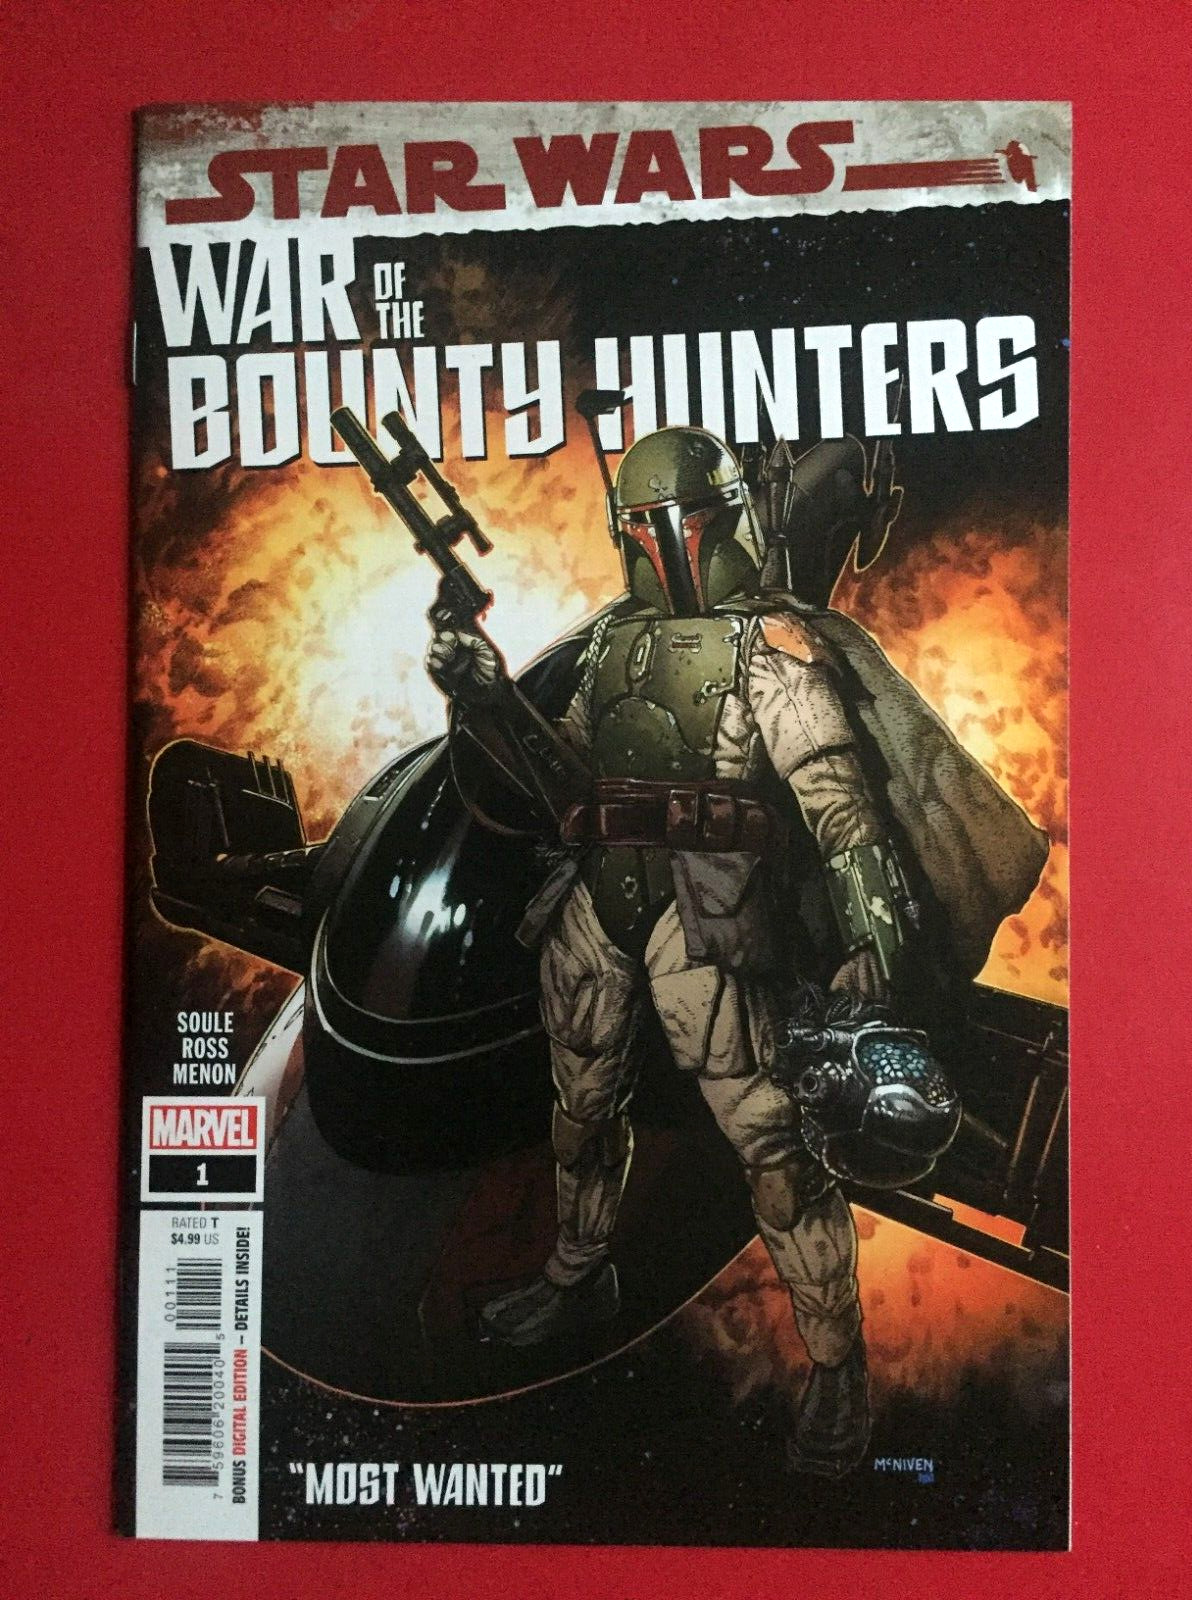 Star Wars WAR OF THE BOUNTY HUNTERS #1A (NM) MCNIVEN Cover Marvel 2021 Boba Fett